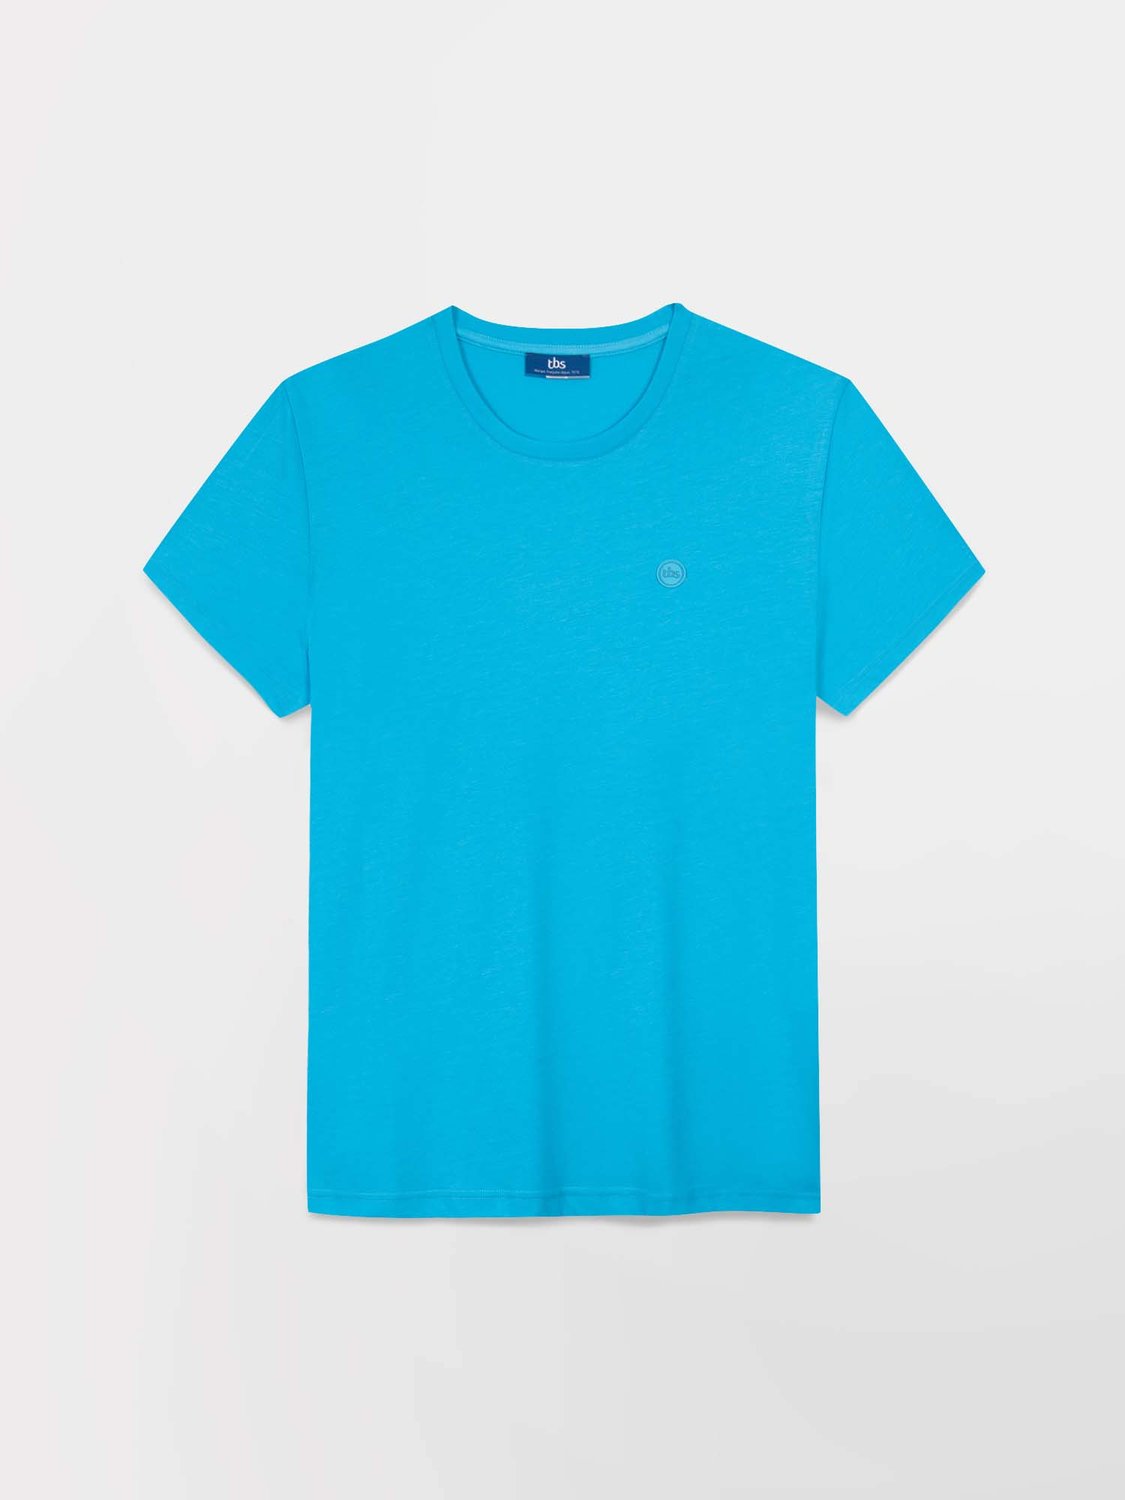 Tee Shirt Homme Manches Courtes Turquoise